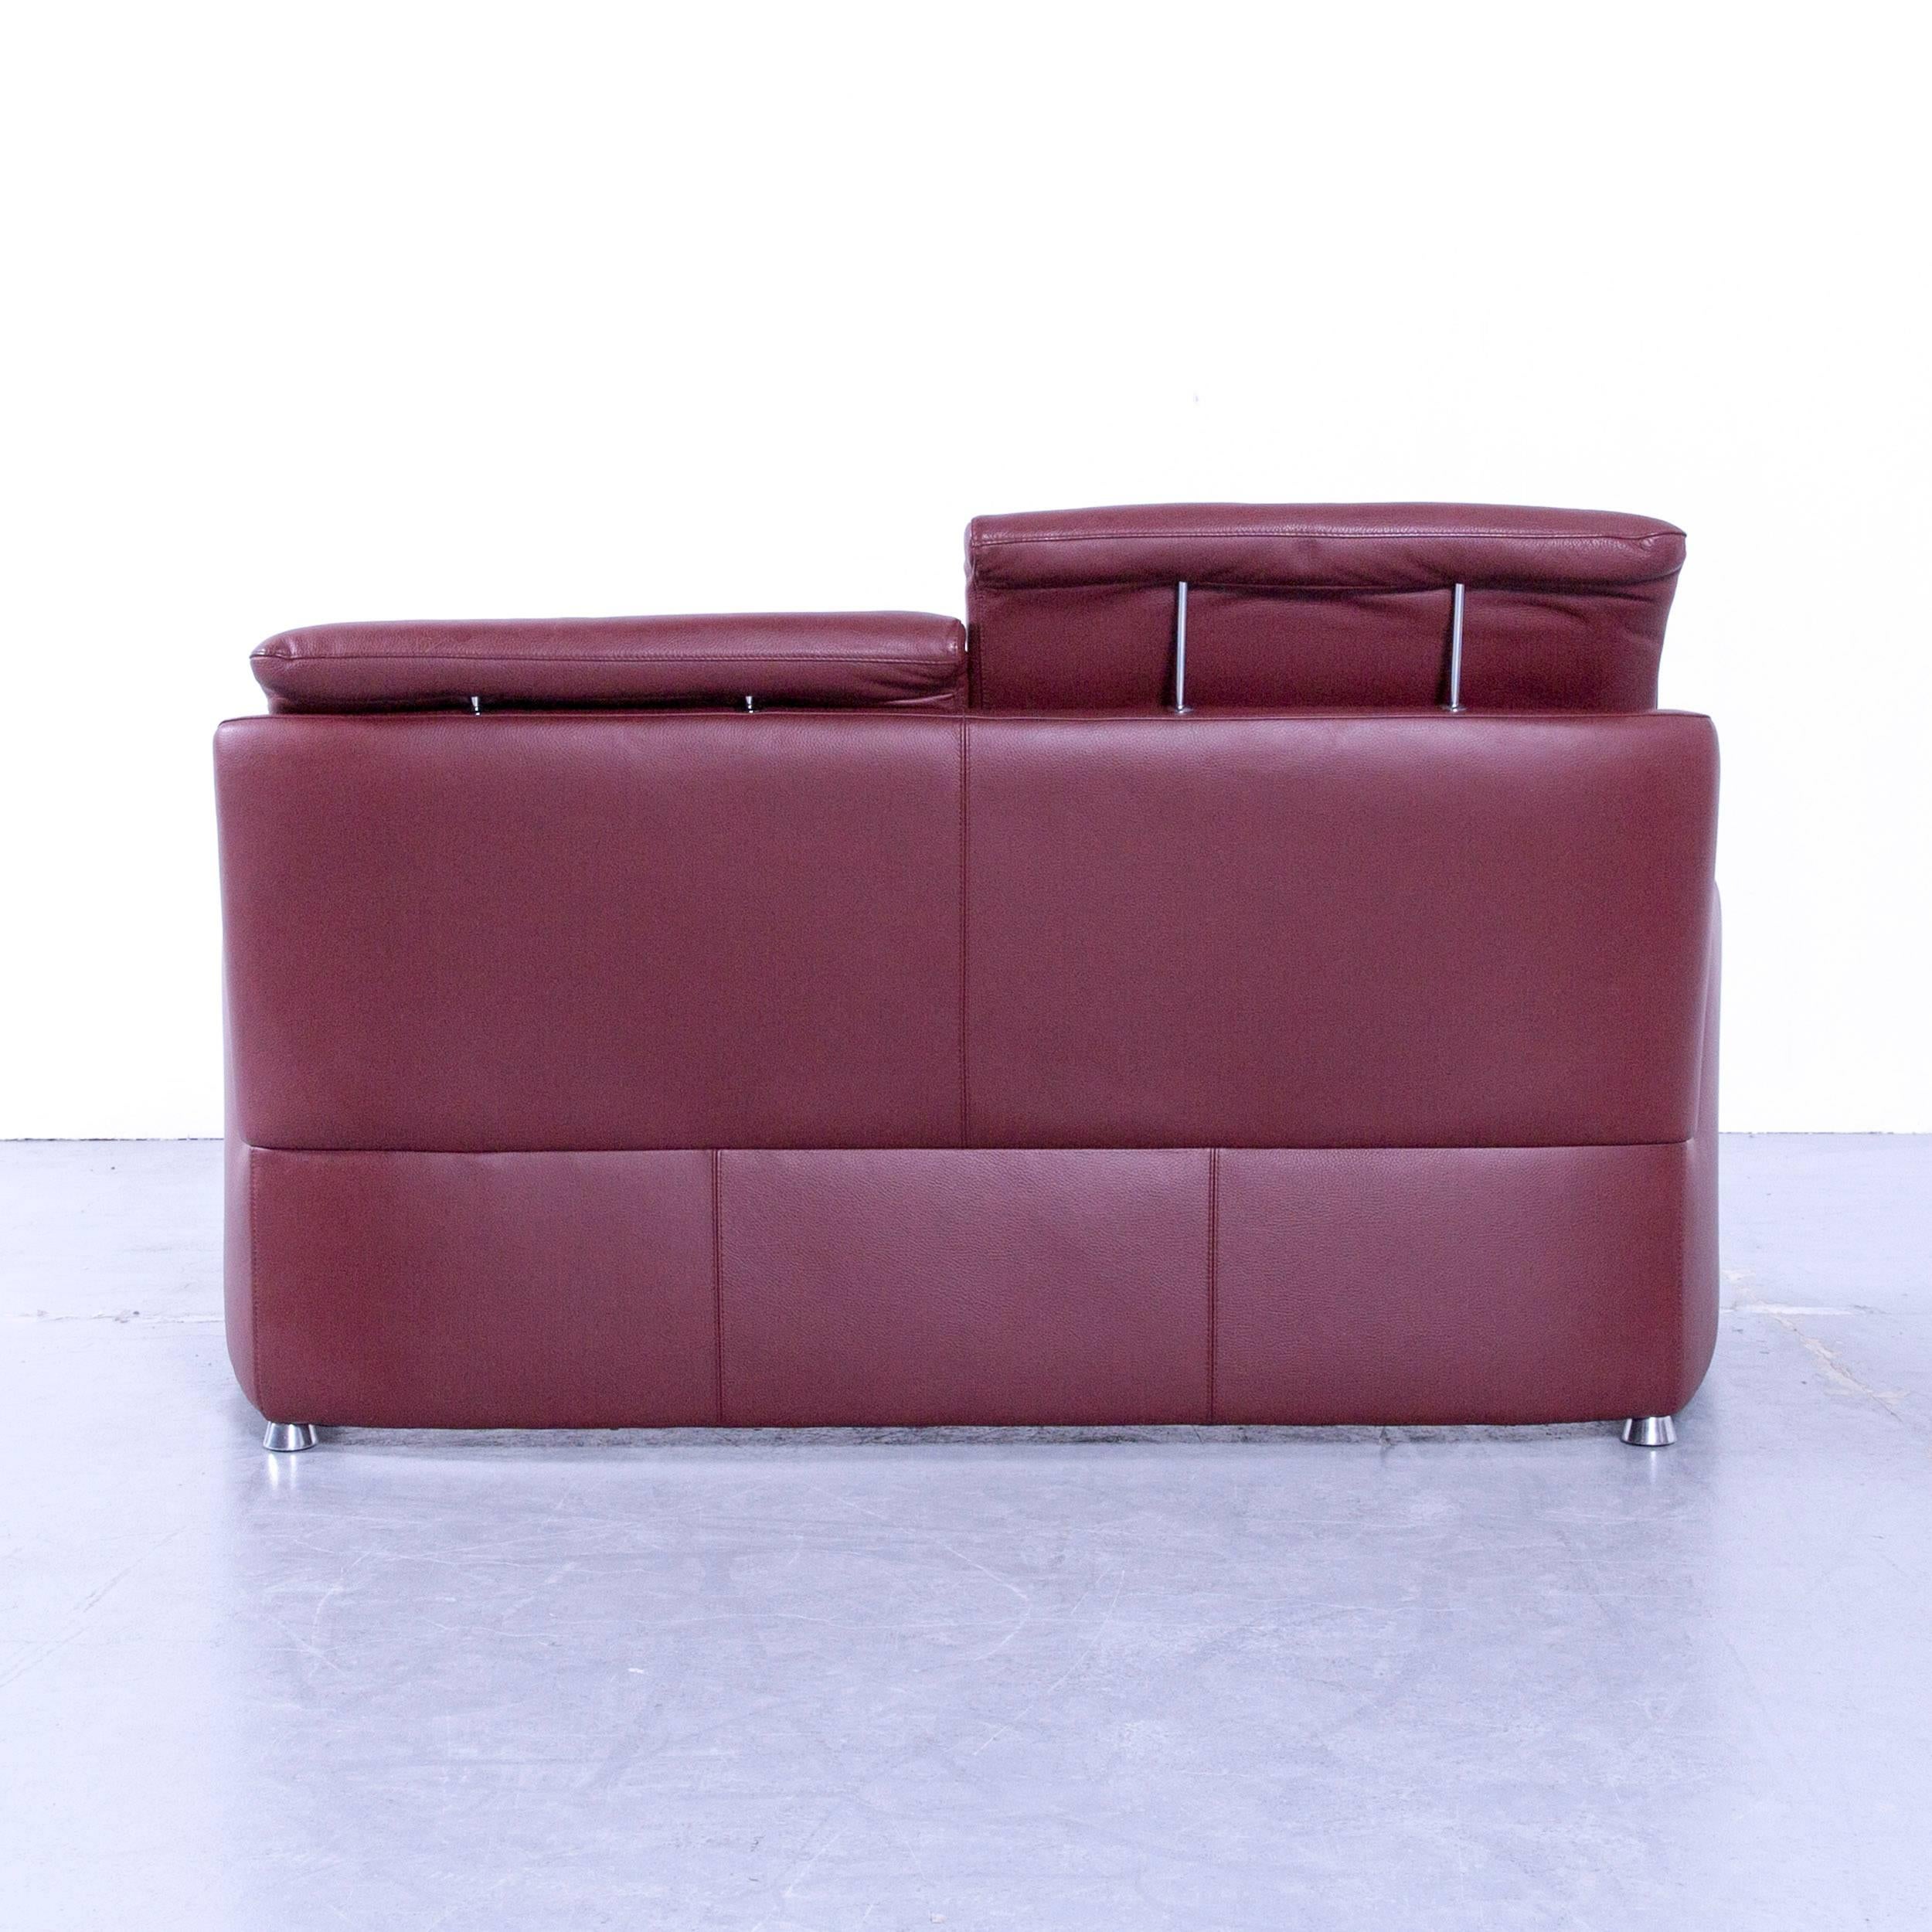 Leolux Fidamigo Designer Leather Sofa Red Two-Seat Function Couch 4